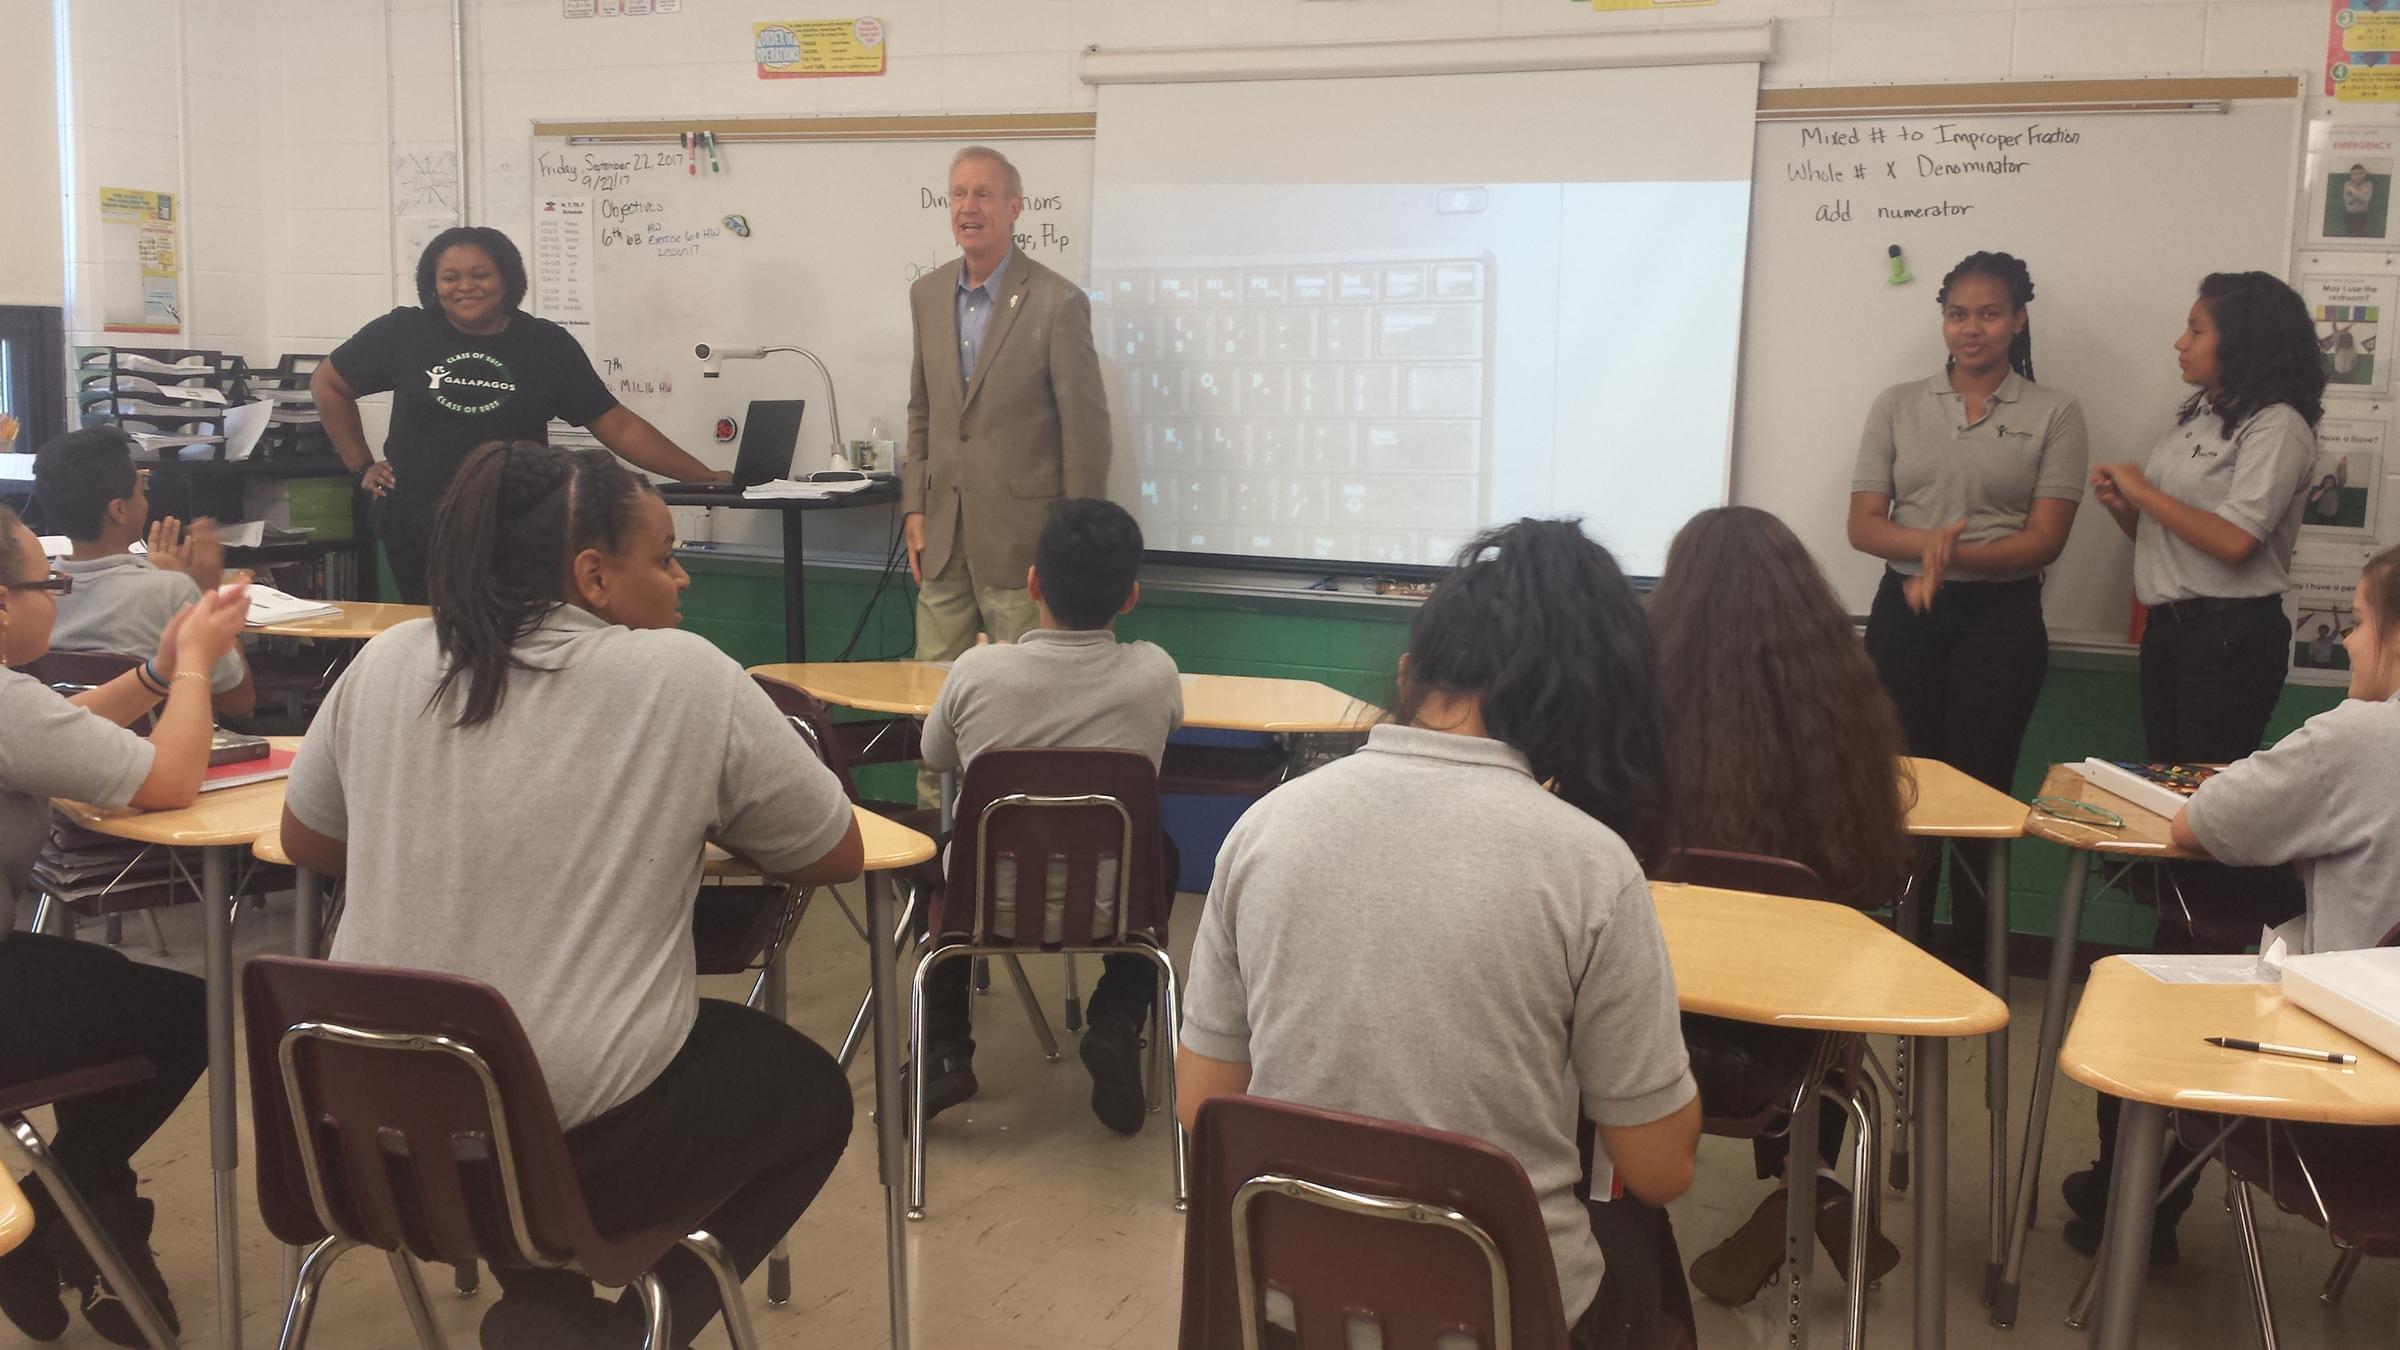 Illinois Governor Bruce Rauner takes questions from students at Galapagos Charter School in Rockford on Sept. 25, 2017